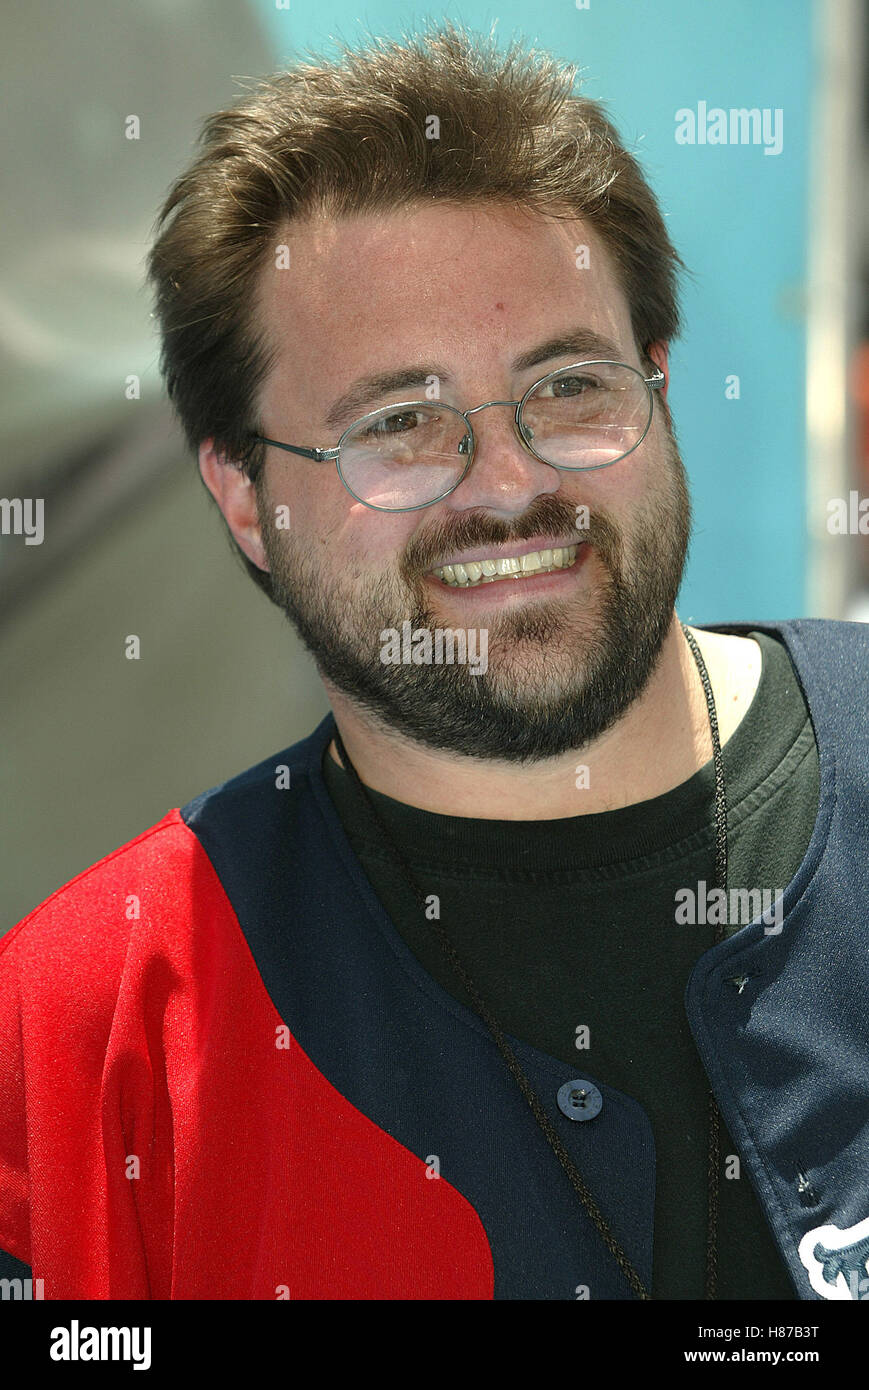 KEVIN SMITH FINDING NEMO WORLD PREMIERE HOLLYWOOD LOS ANGELES USA 18 May 2003 Stock Photo